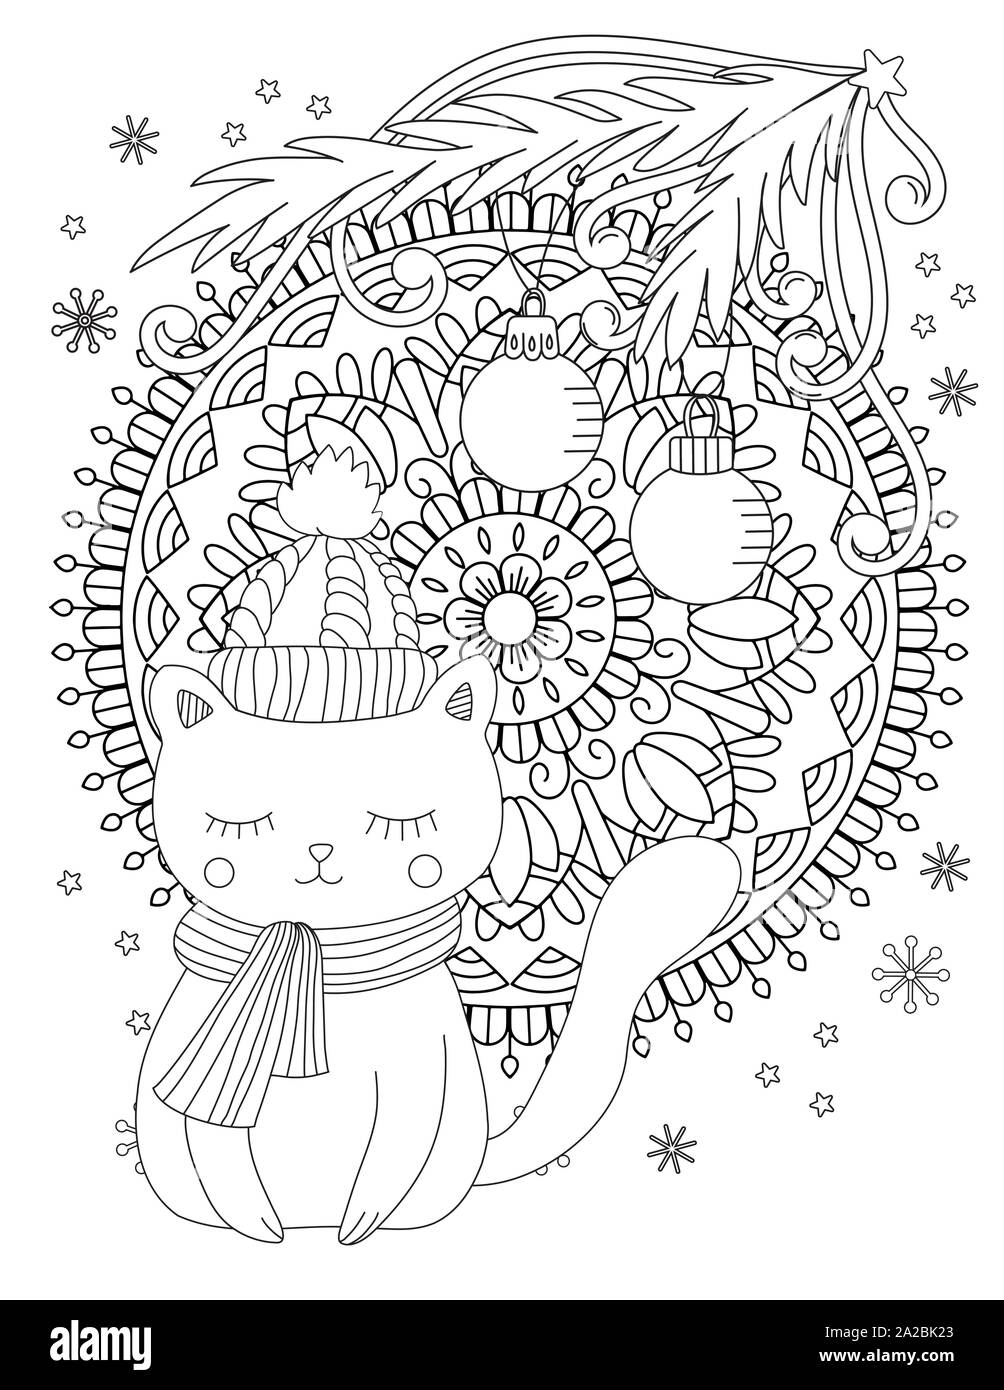 Christmas coloring page. Adult coloring book. Cute cat with scarf ...